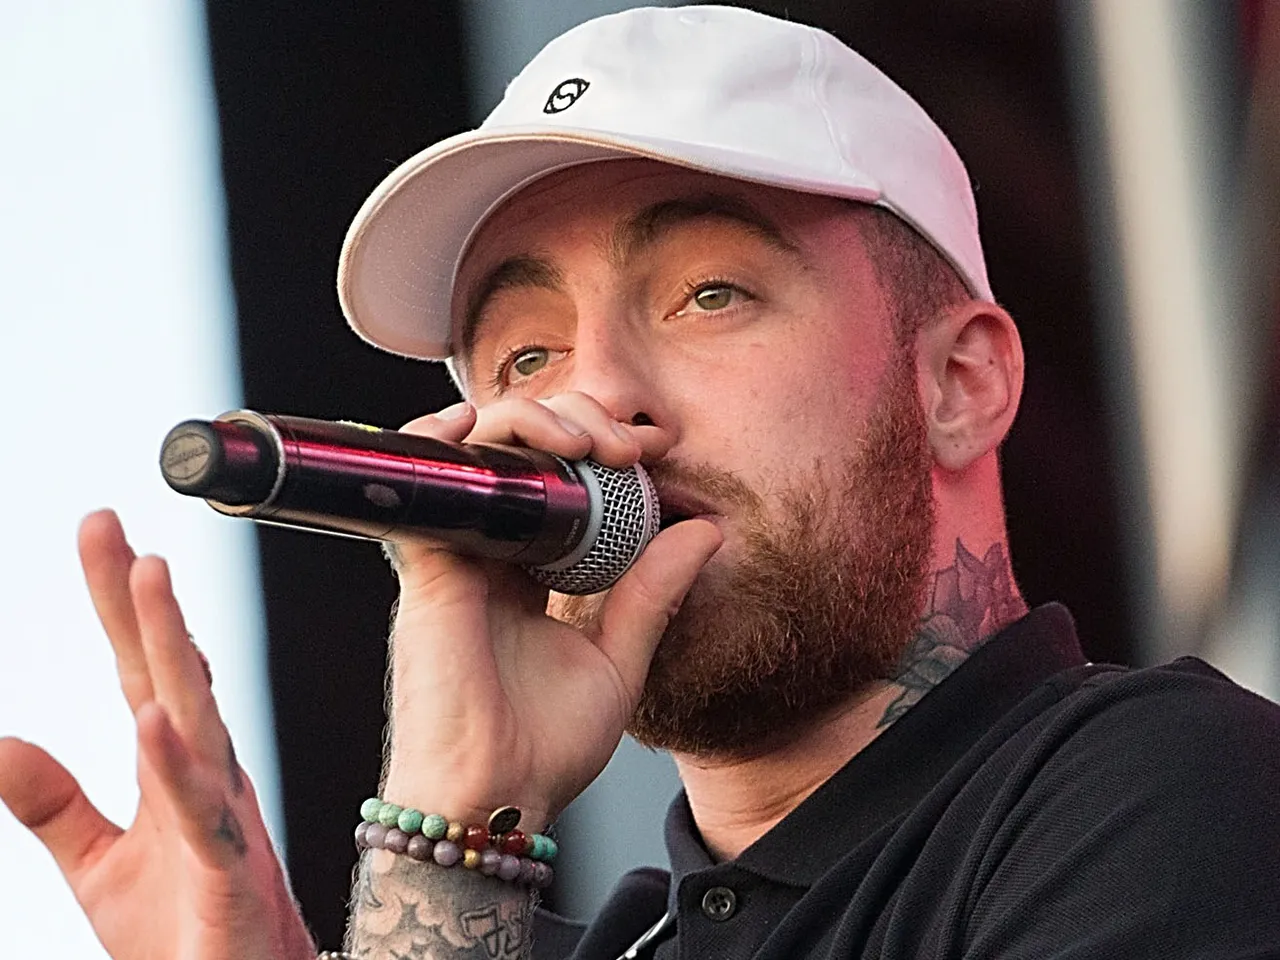 Dive into Mac Miller Musical Journey